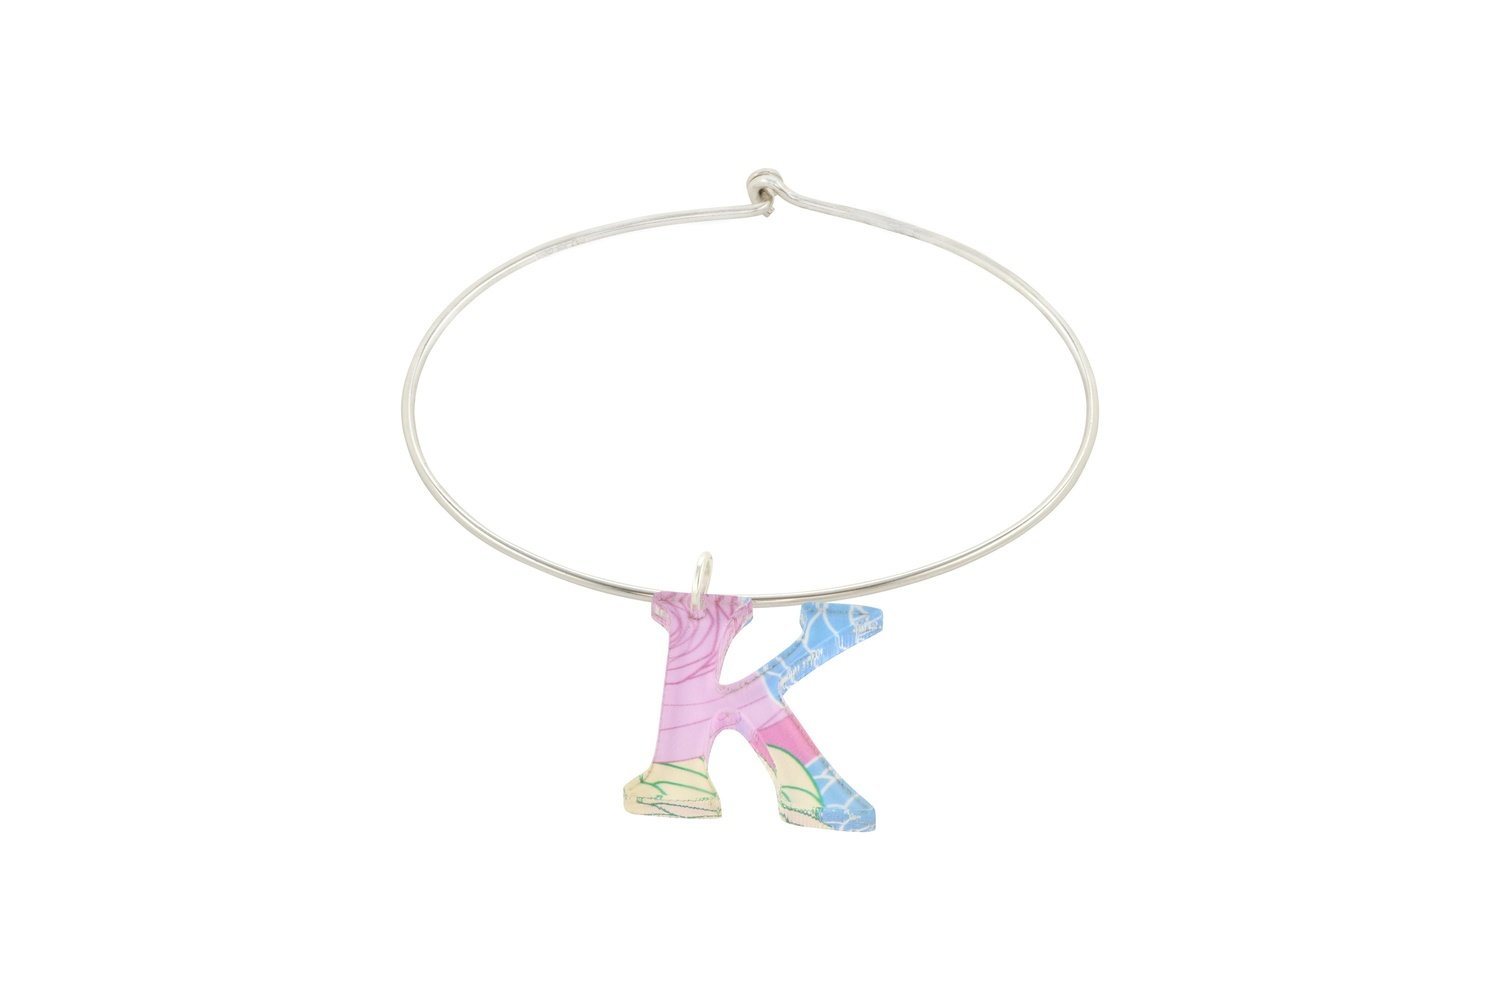 Sculpted Alphabet Charm with Sterling Silver Bangle Bracelet